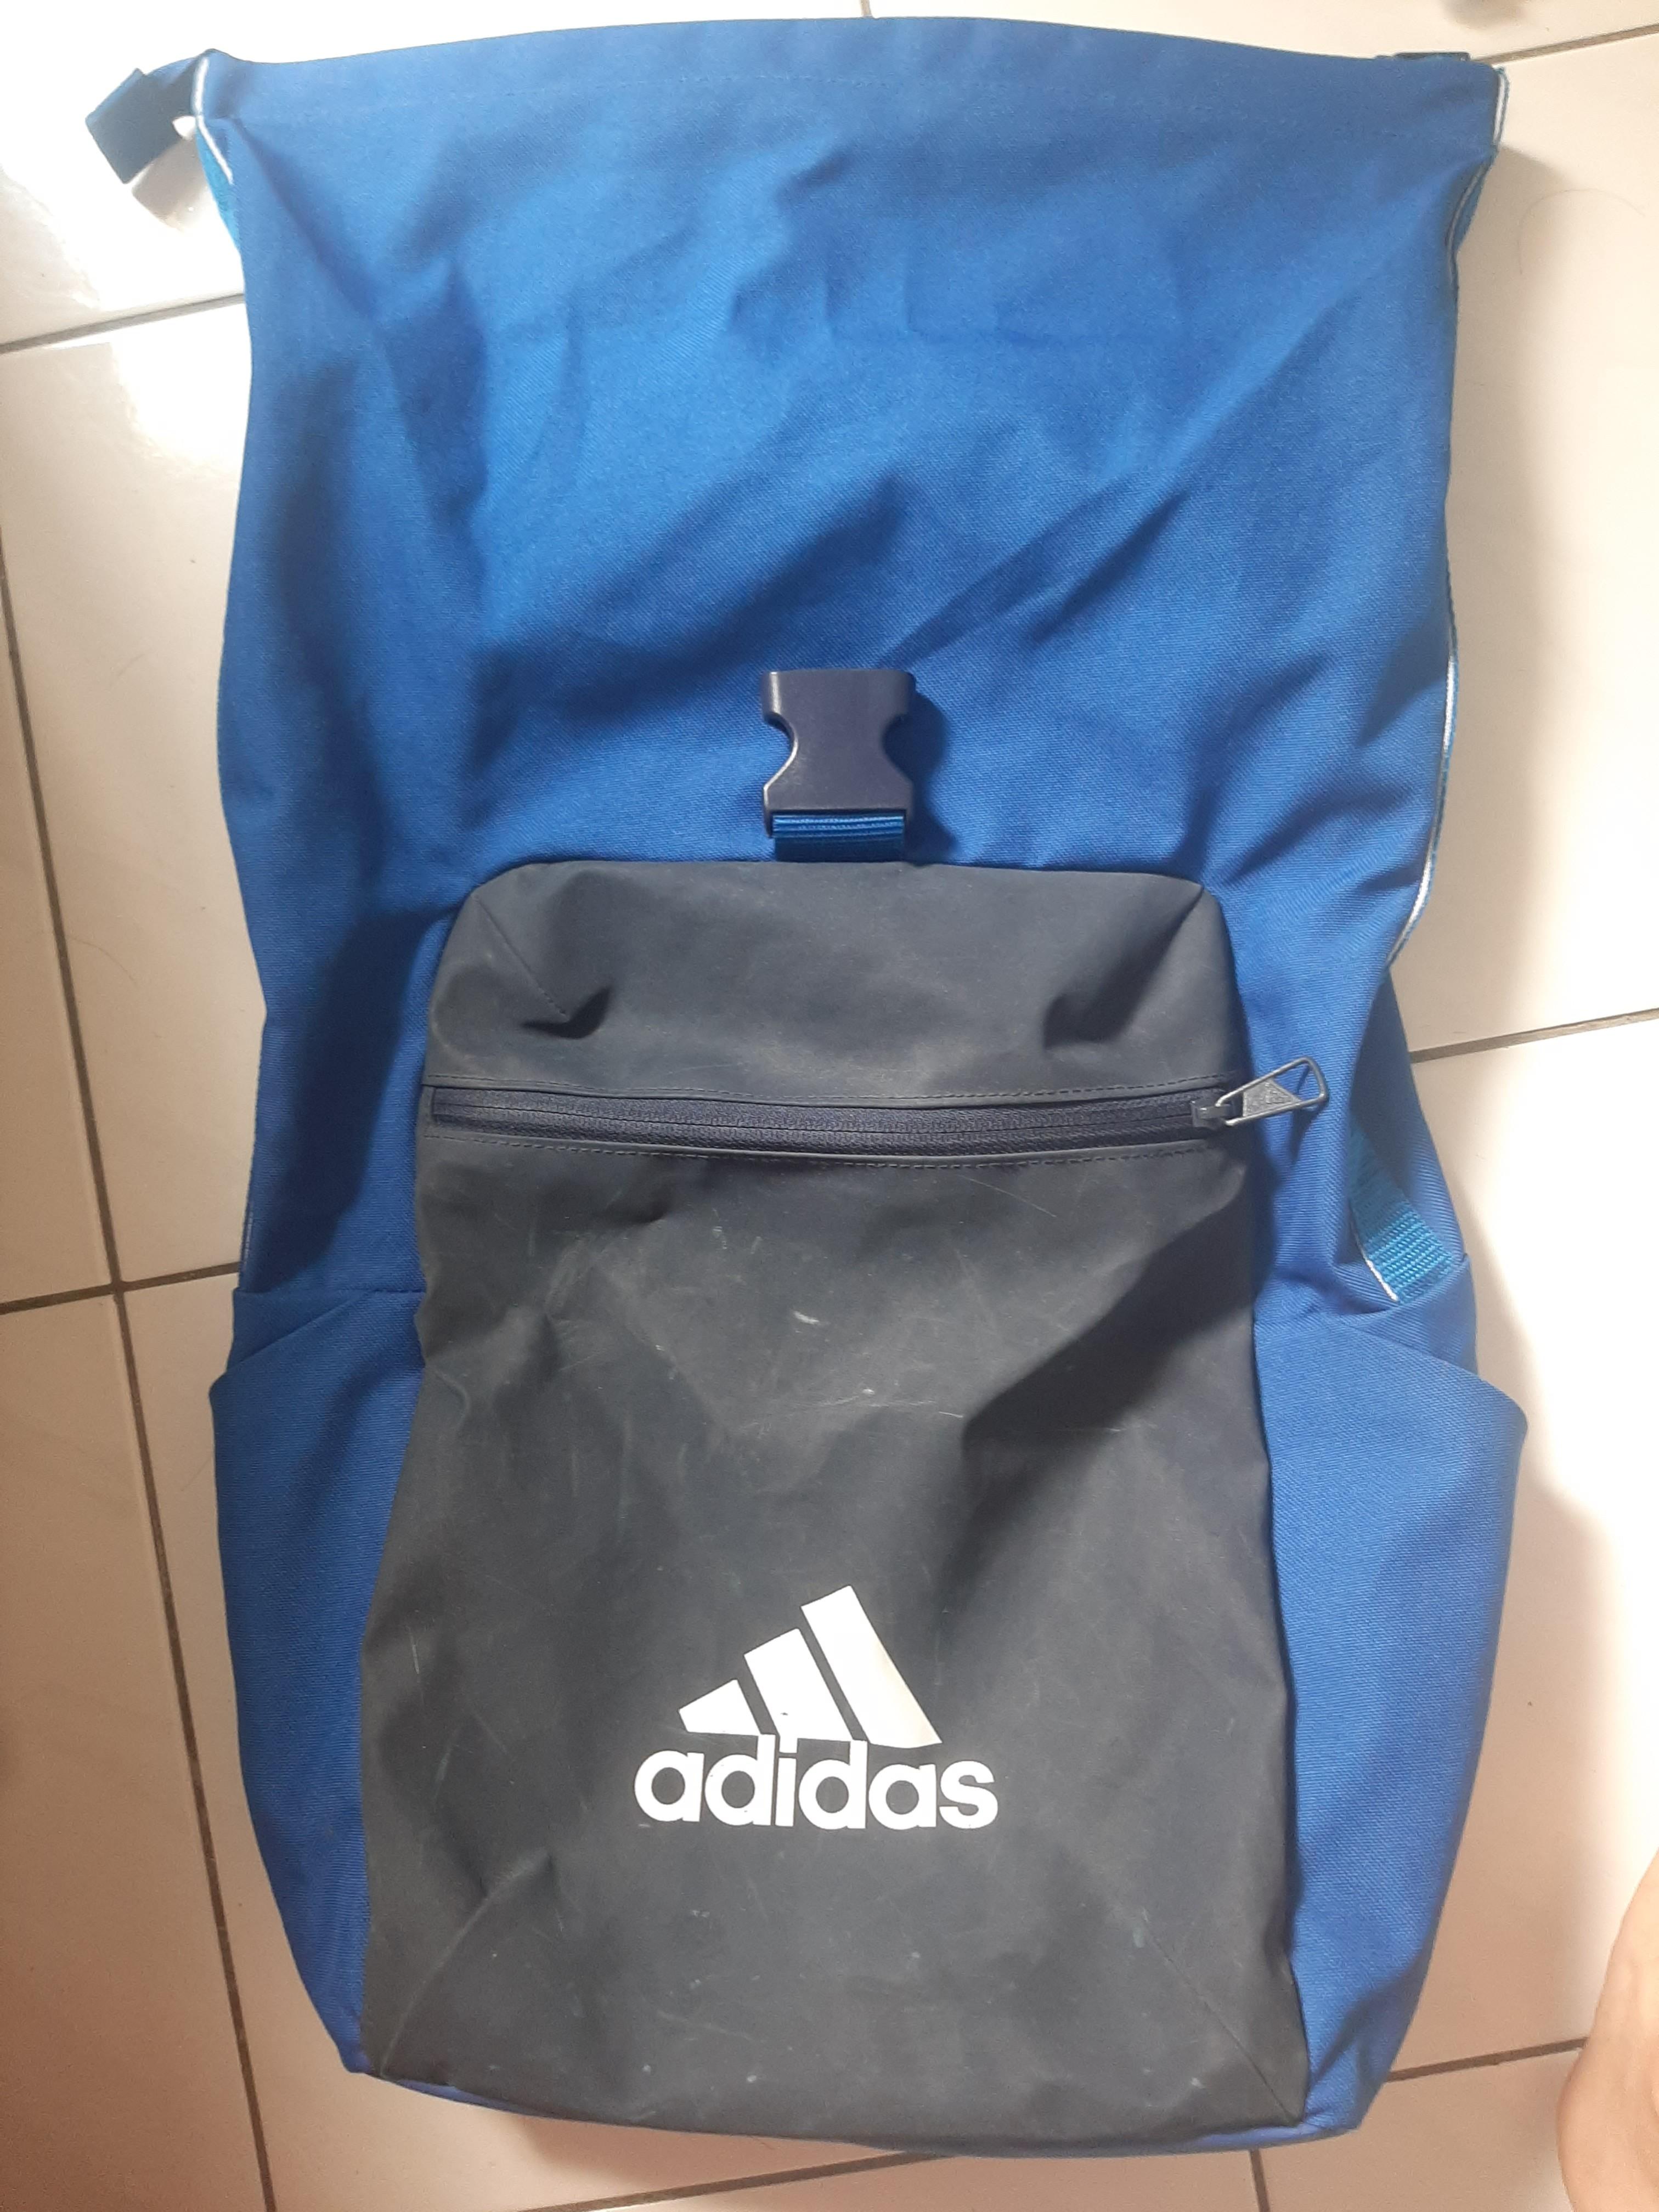 old adidas backpack